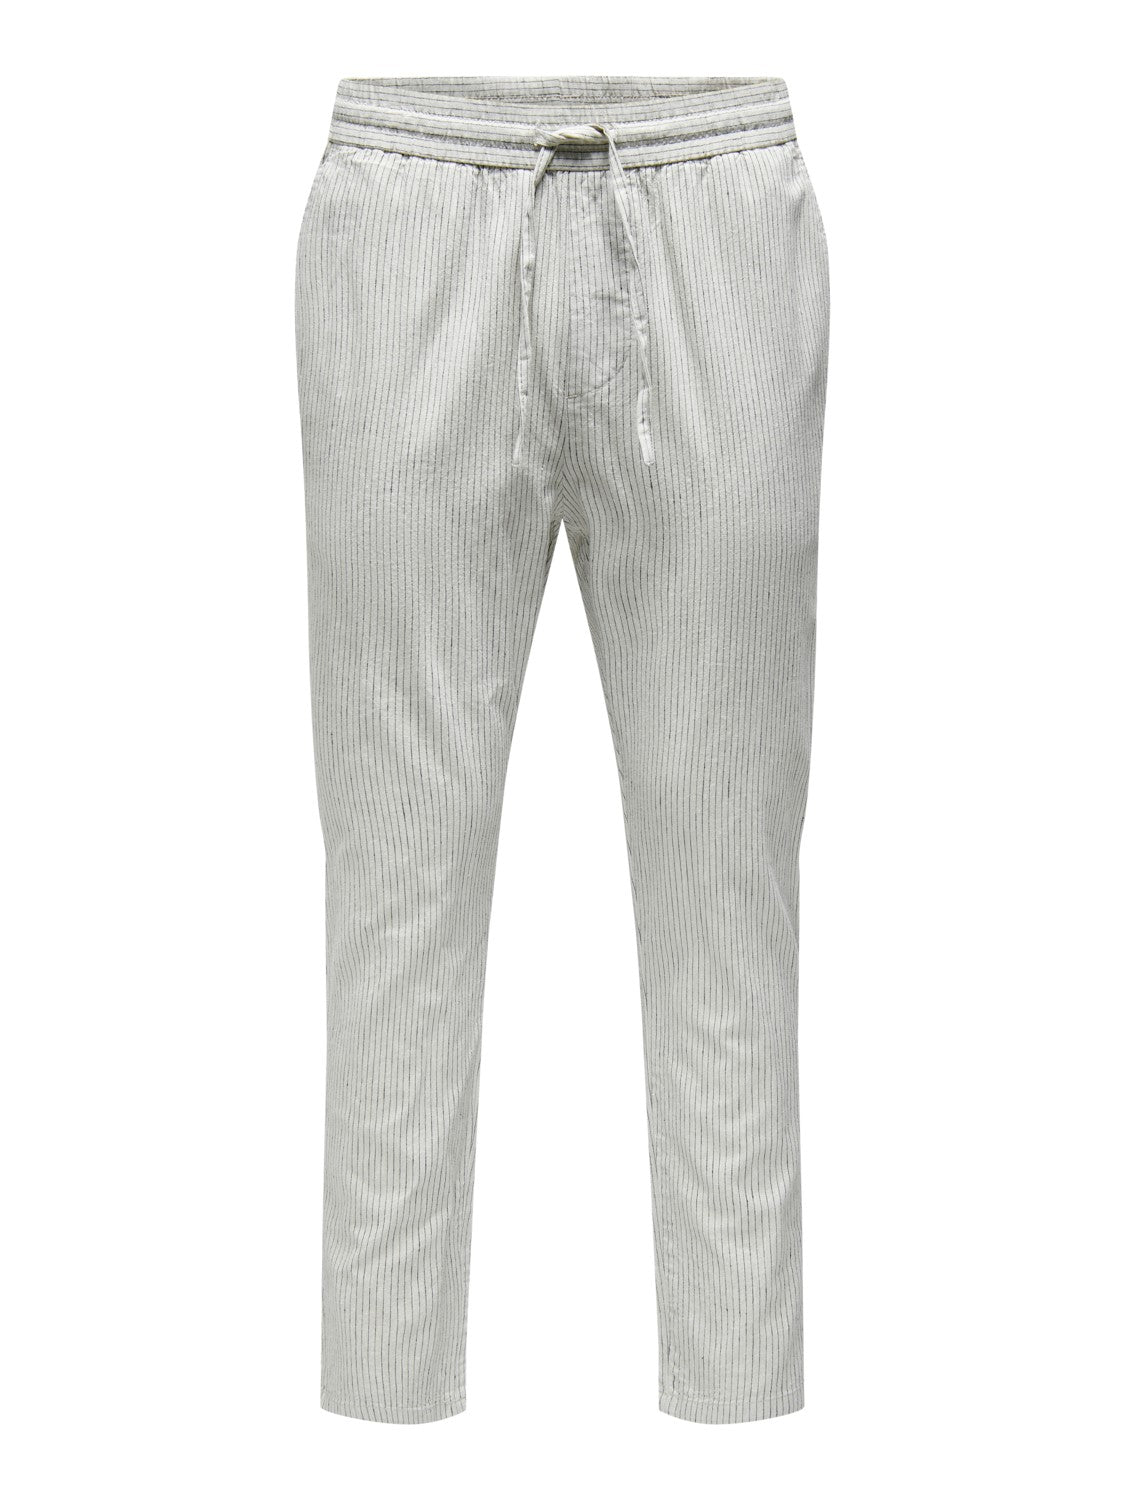 ONLY & SONS PANTALONE RIGATO IN LINO COTONE - Moonstruck